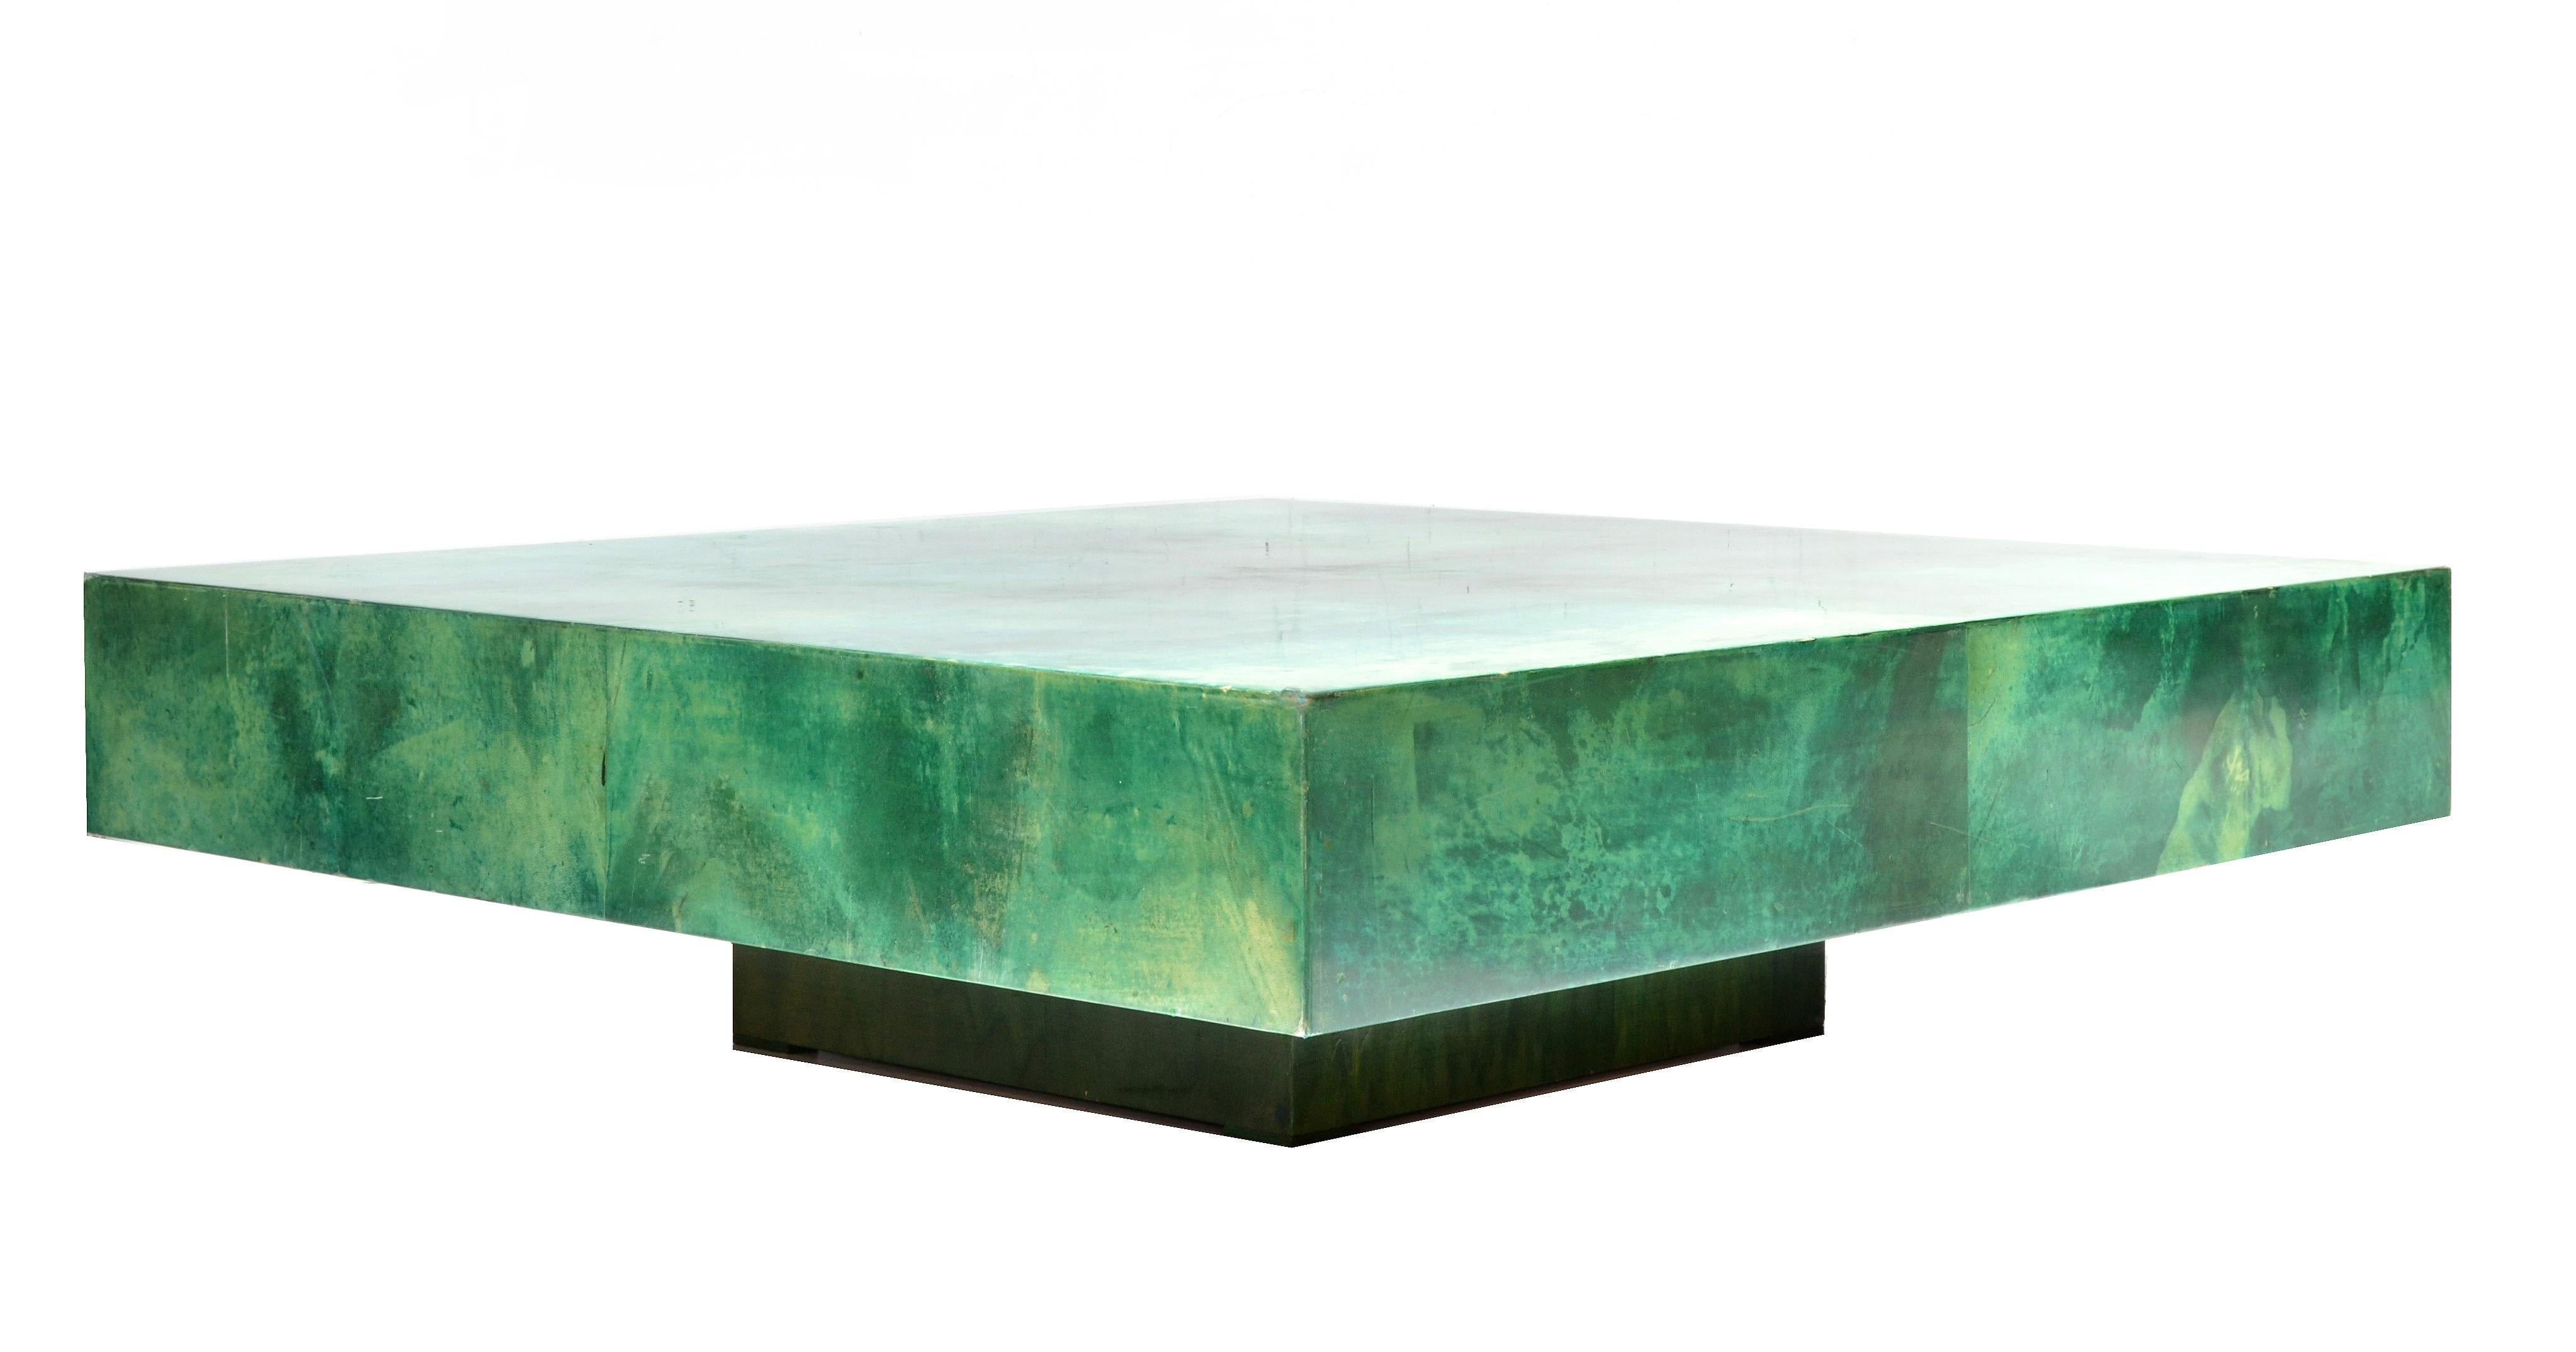 This is an original Aldo Tura square large coffee or cocktail table in Emerald green goatskin.
The top is lacquered to keep the long lasting beauty.
Mid-Century Modern Craftsmanship with the ability to last many decades.